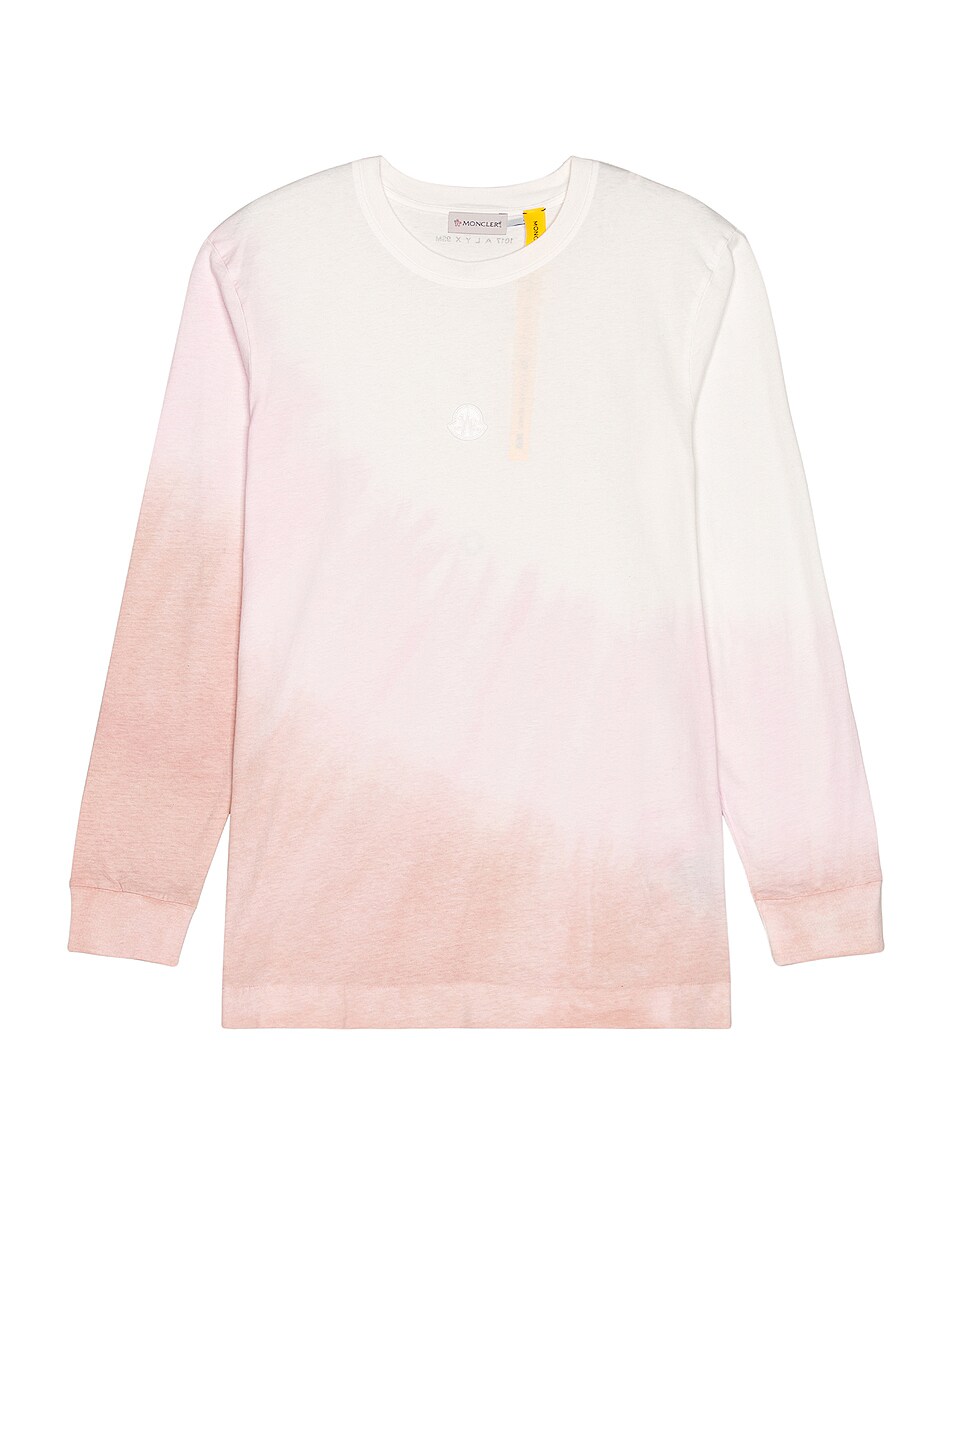 Image 1 of Moncler Genius Moncler Alyx Recycled Cotton Long Sleeve Tee in Pink & White